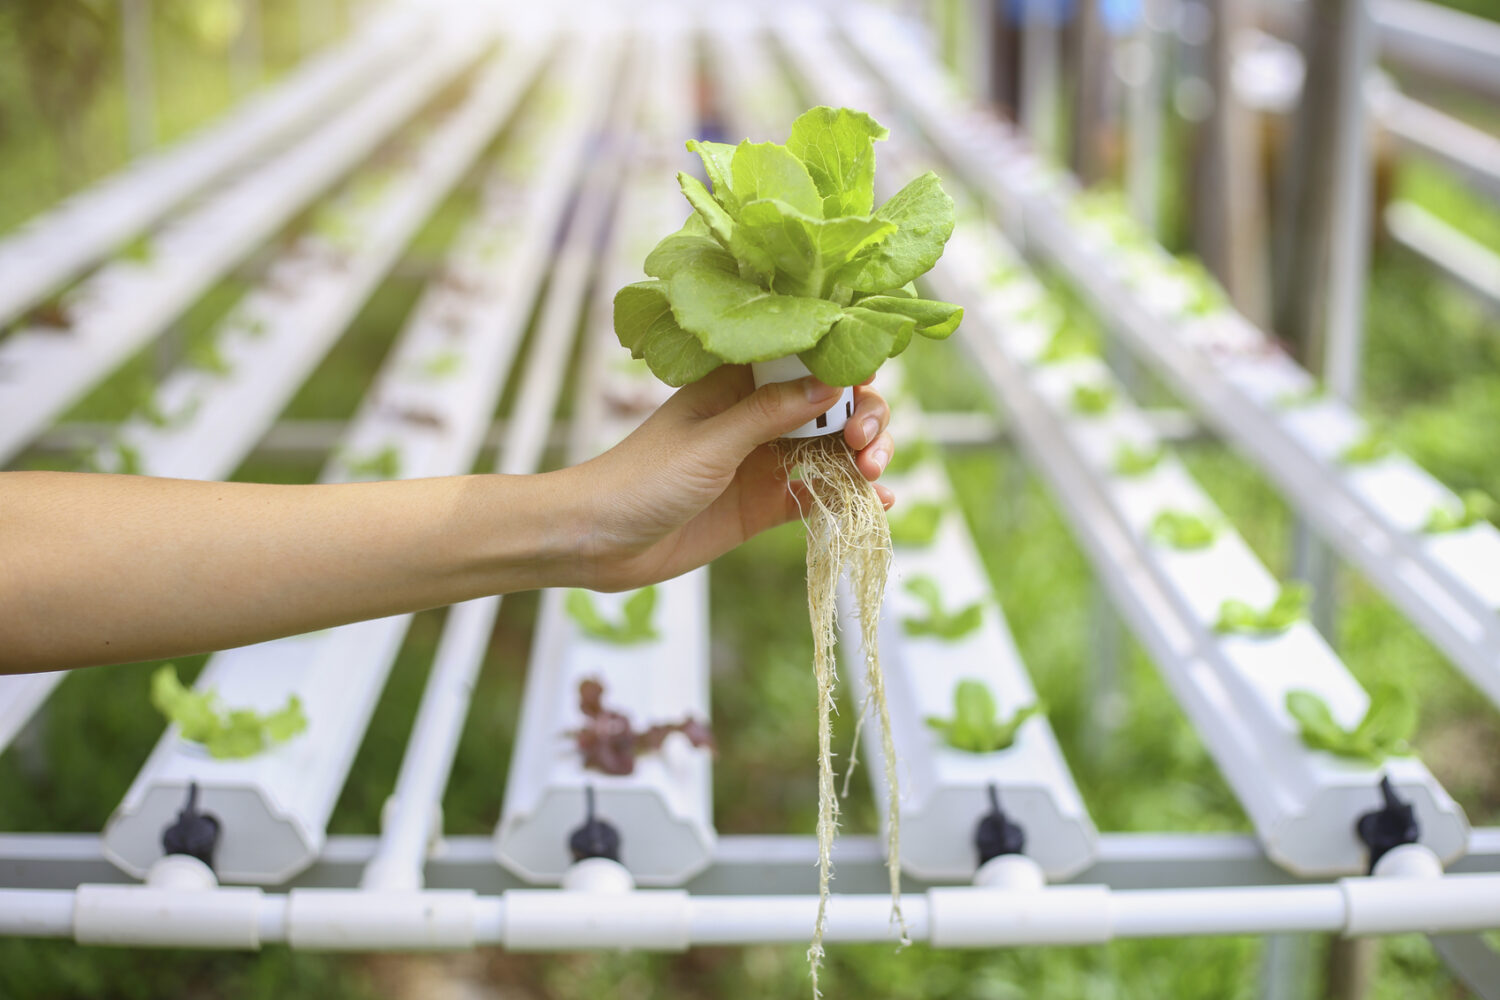 Crop-One-Holdings-teams-with-Emirates-Flight-Catering-to-double-production-of-vertical-farms-scaled Weltweit größte Vertical Farm in Dubai eröffnet